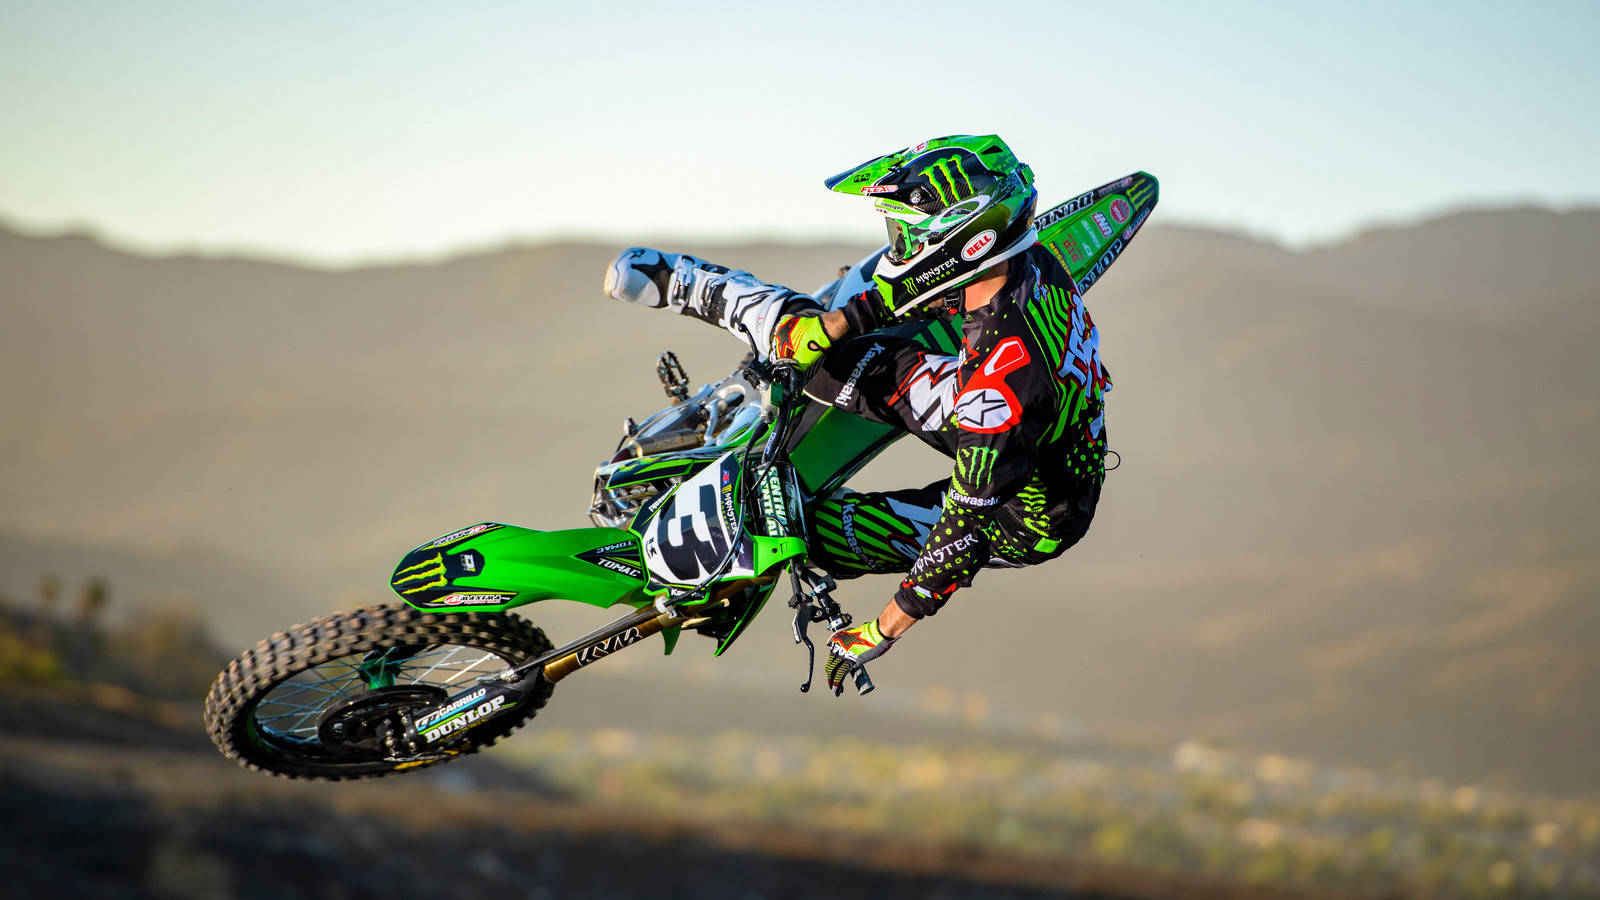 Thrilling Action with a Monster Dirt Bike Wallpaper